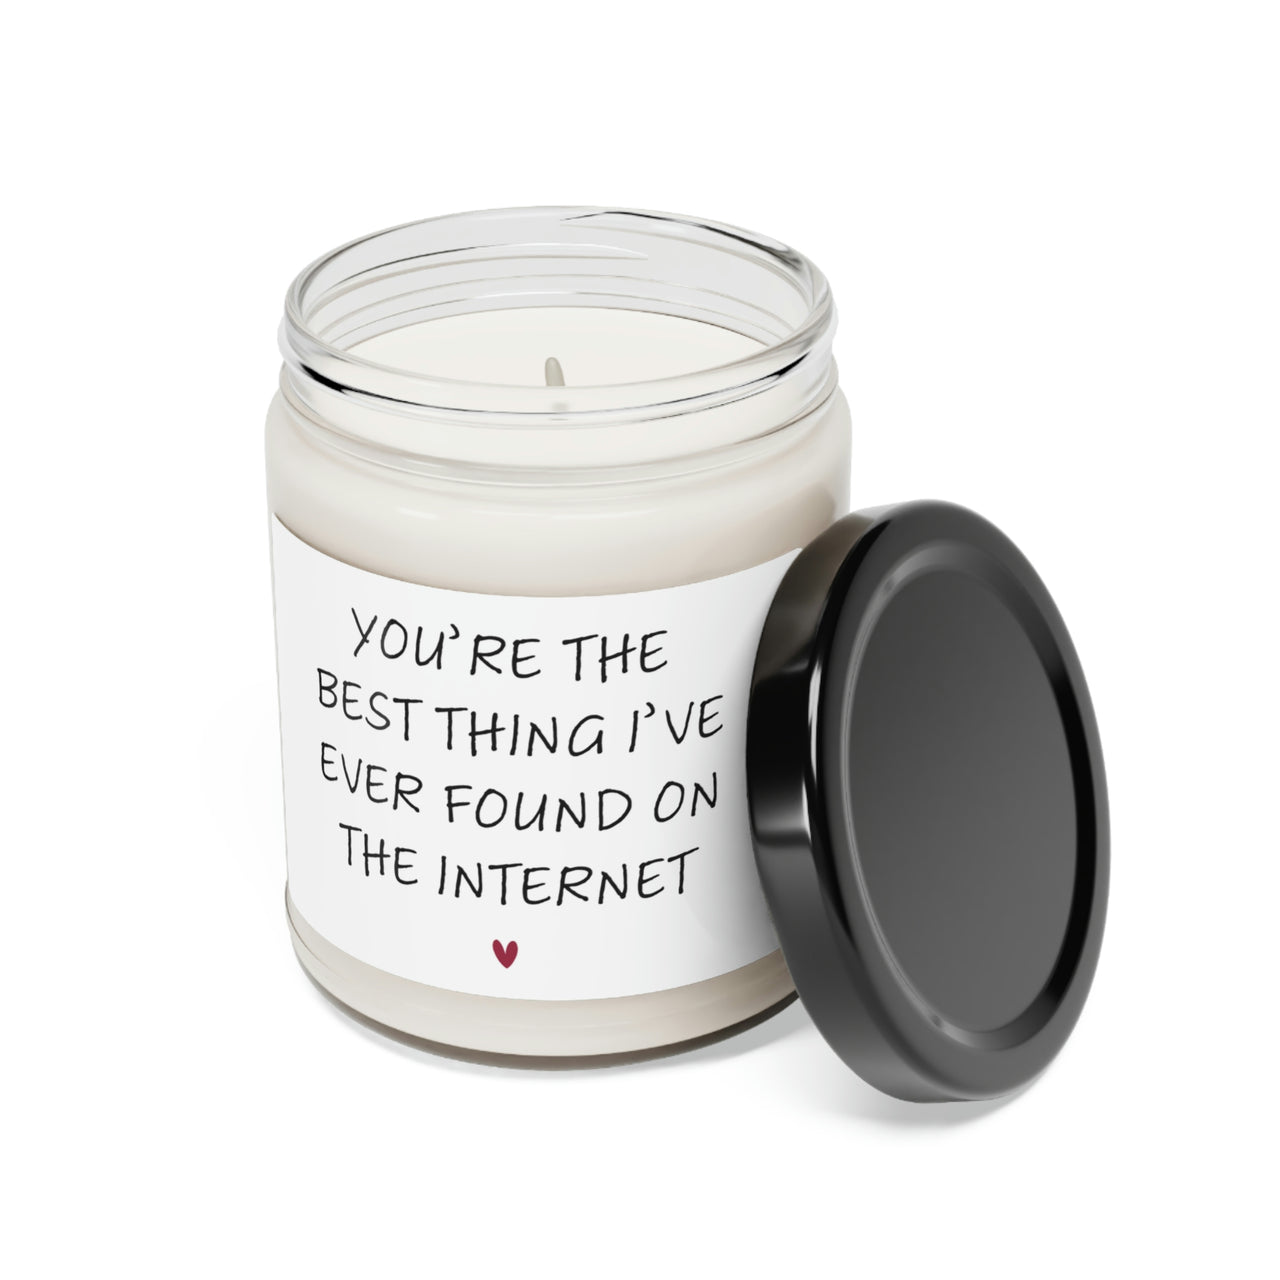 You're the Best Thing I've Ever Found on the Internet Candle